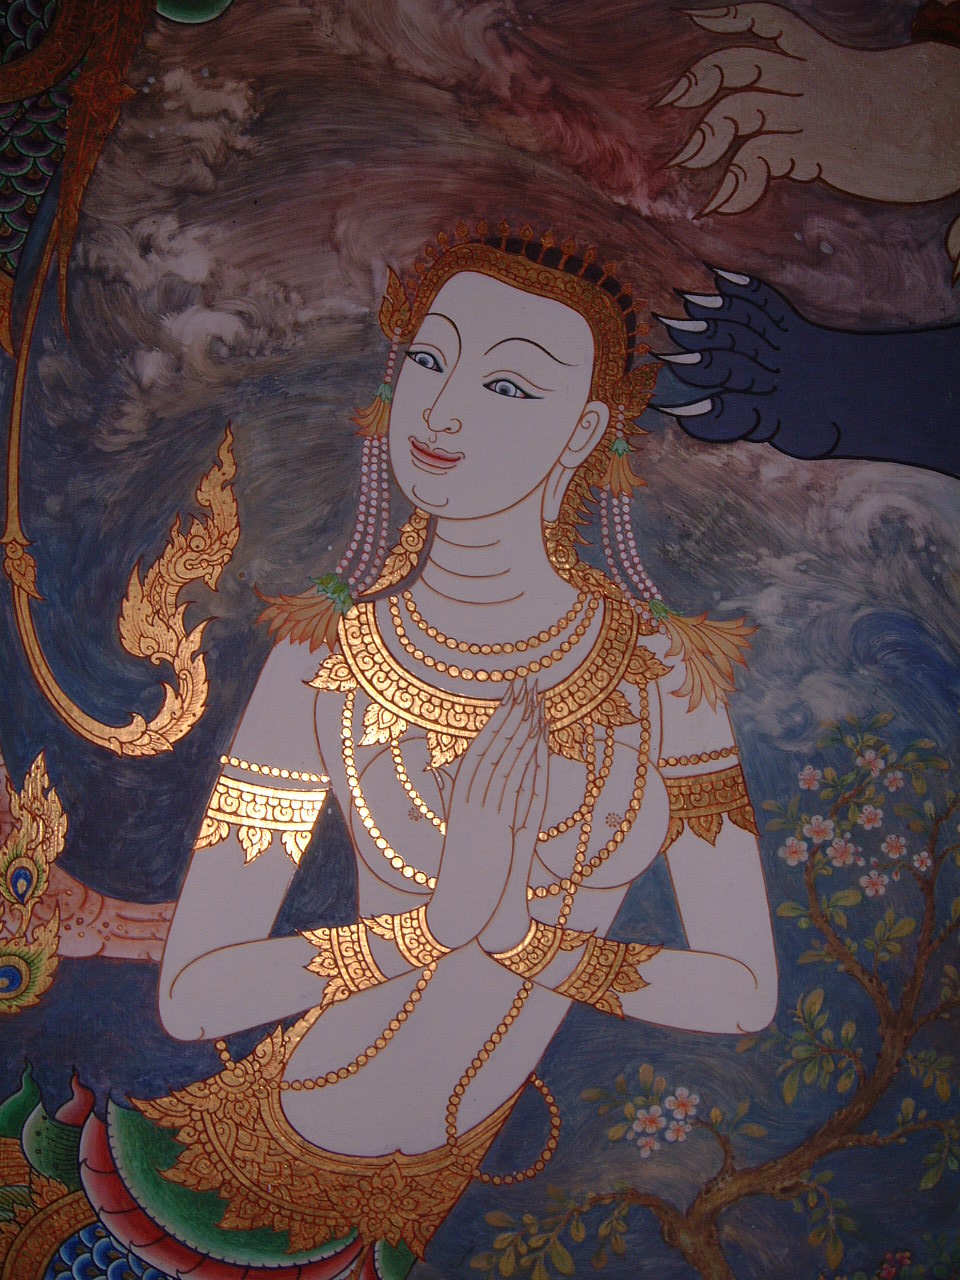 An illustration of a mythical figure with her hands together.